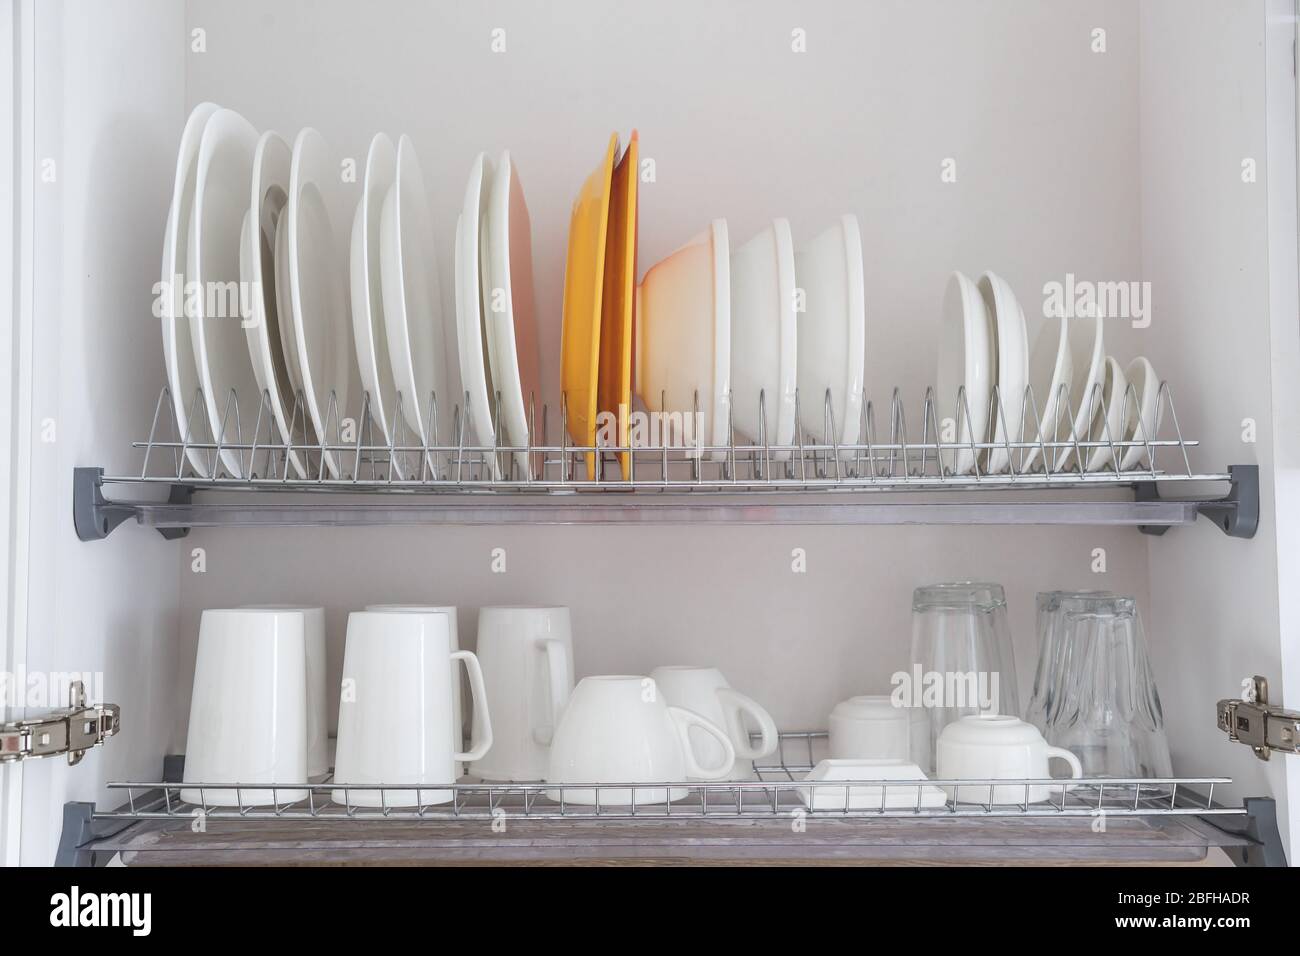 Utensils on metal rack in commercial kitchen Stock Photo - Alamy